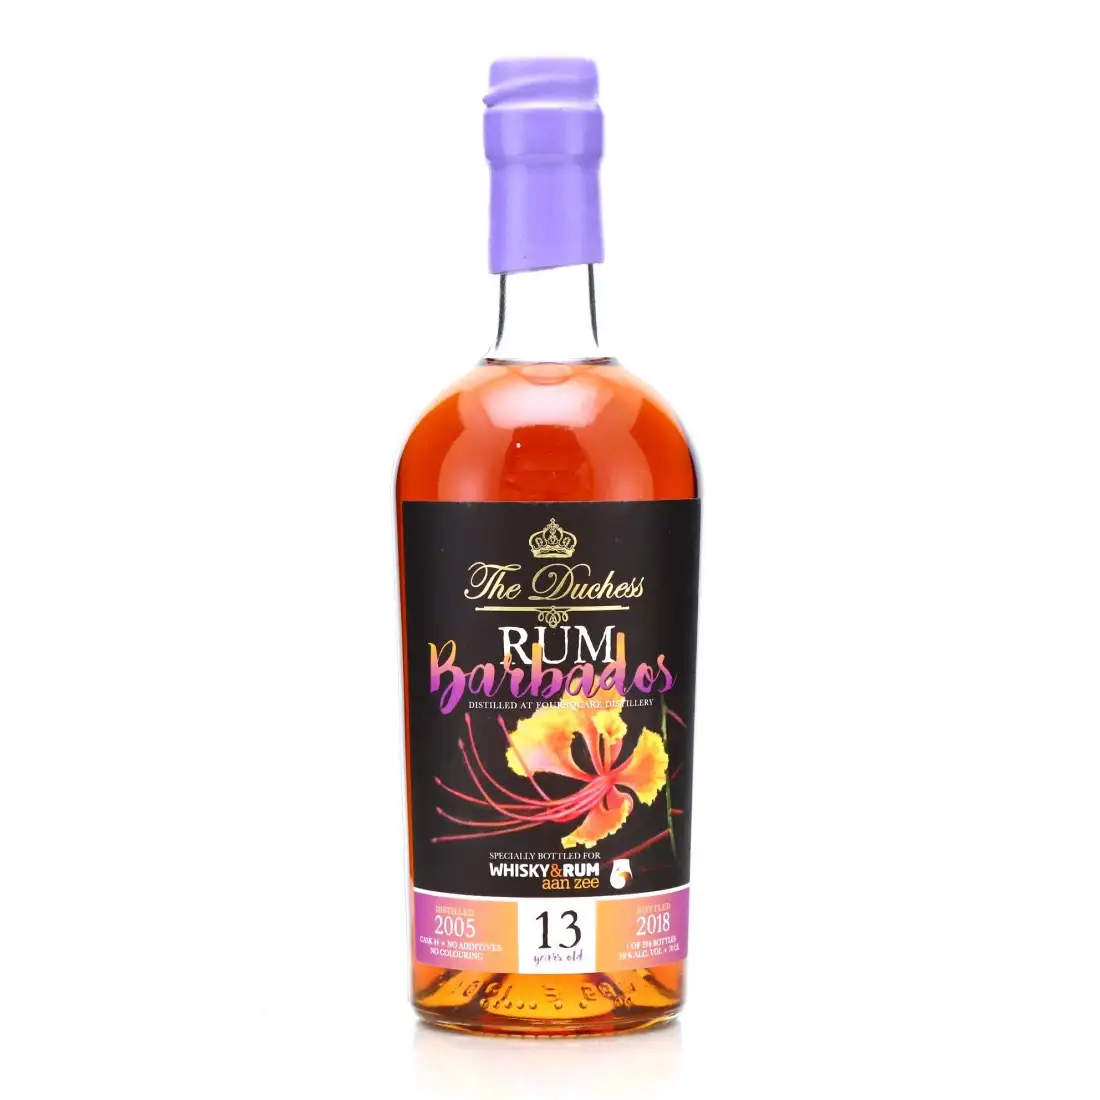 Image of the front of the bottle of the rum Barbados